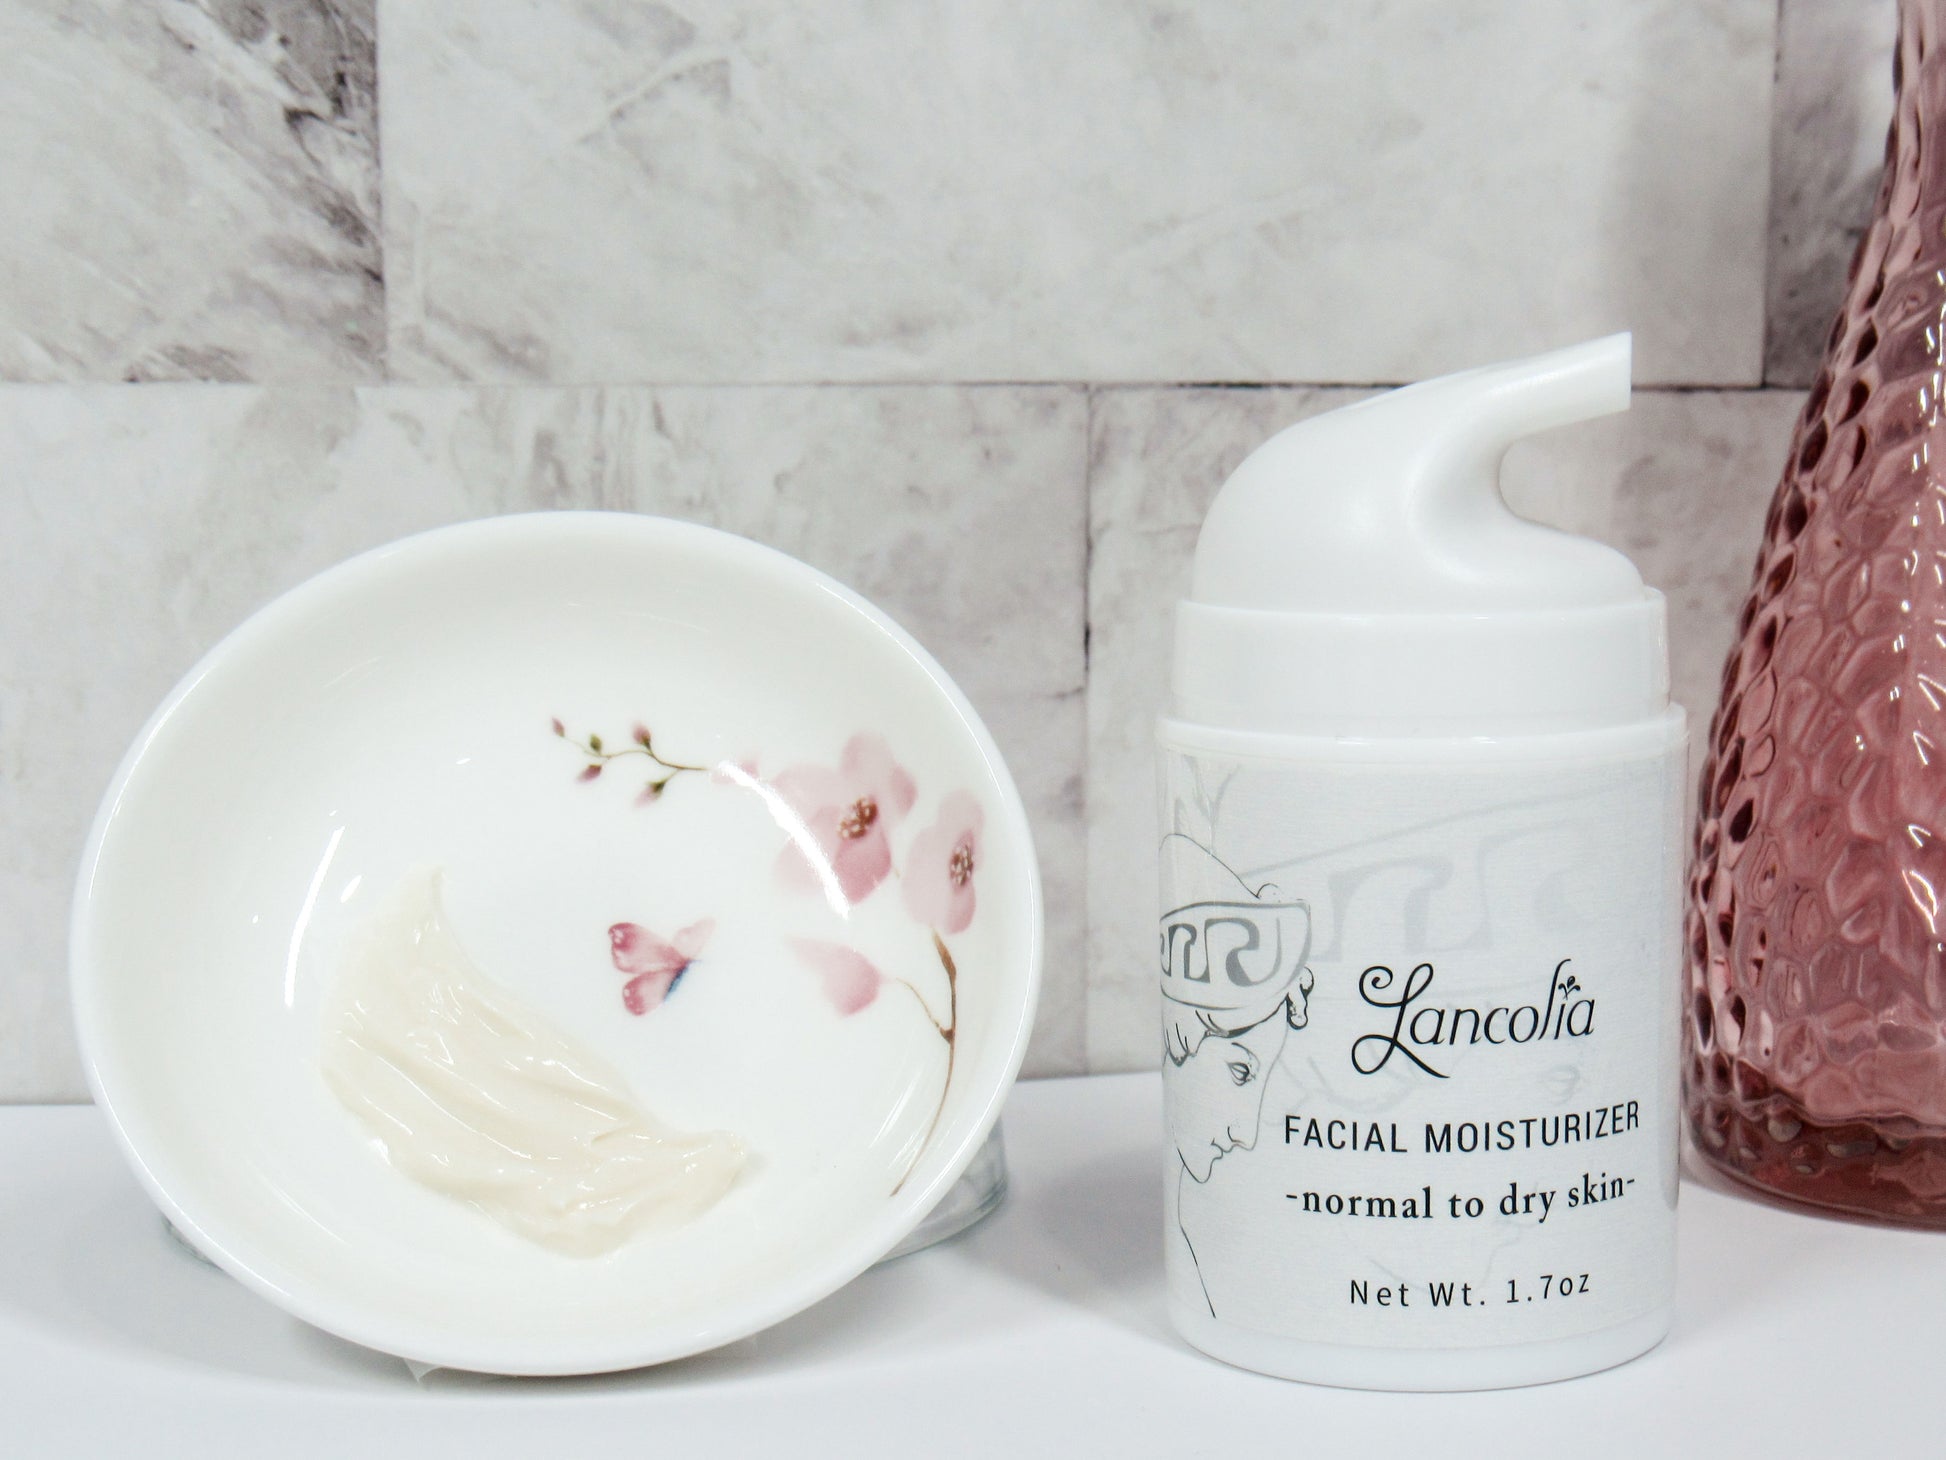 Lancolia moisturizer for dry skin and normal skin 